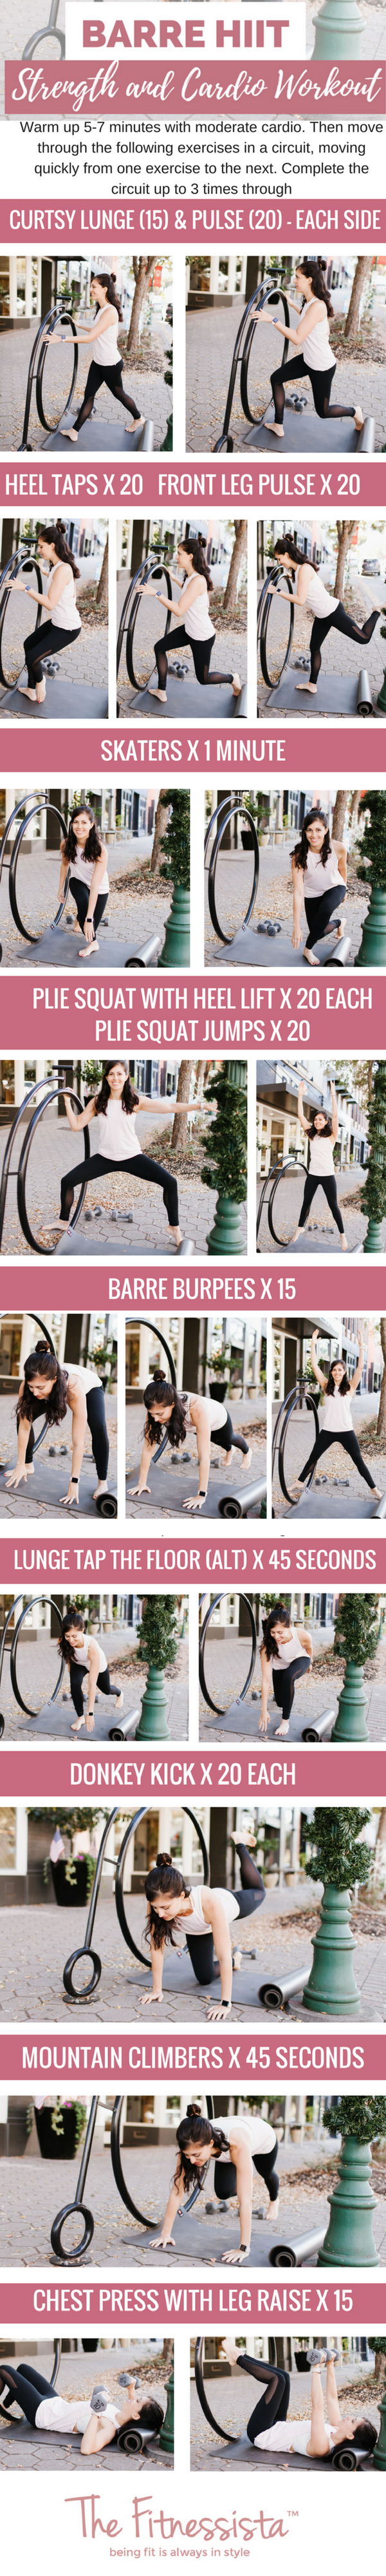 5 Day Barre Hiit Workout for Burn Fat fast